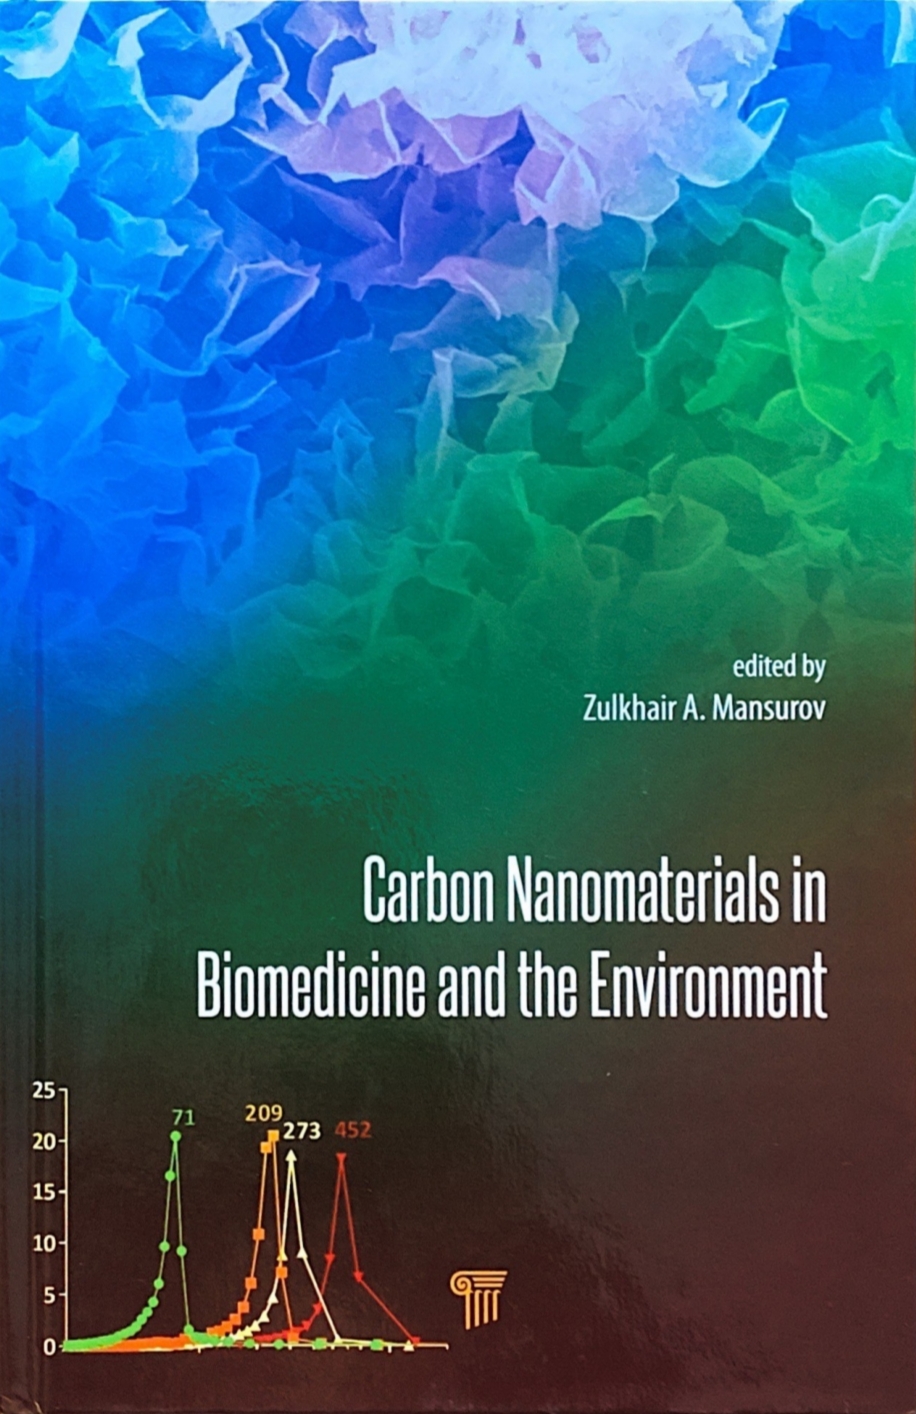 THE TEAM OF THE DEPARTMENT OF BIOTECHNOLOGY OF THE AL-FARABI KAZAKH NATIONAL UNIVERSITY AND THE INSTITUTE OF COMBUSTION PROBLEMS PUBLISHED A BOOK EDITED BY THE ACADEMICIAN OF THE NATIONAL ACADEMY OF SCIENCES OF THE REPUBLIC OF KAZAKHSTAN Z.A. MANSUROV